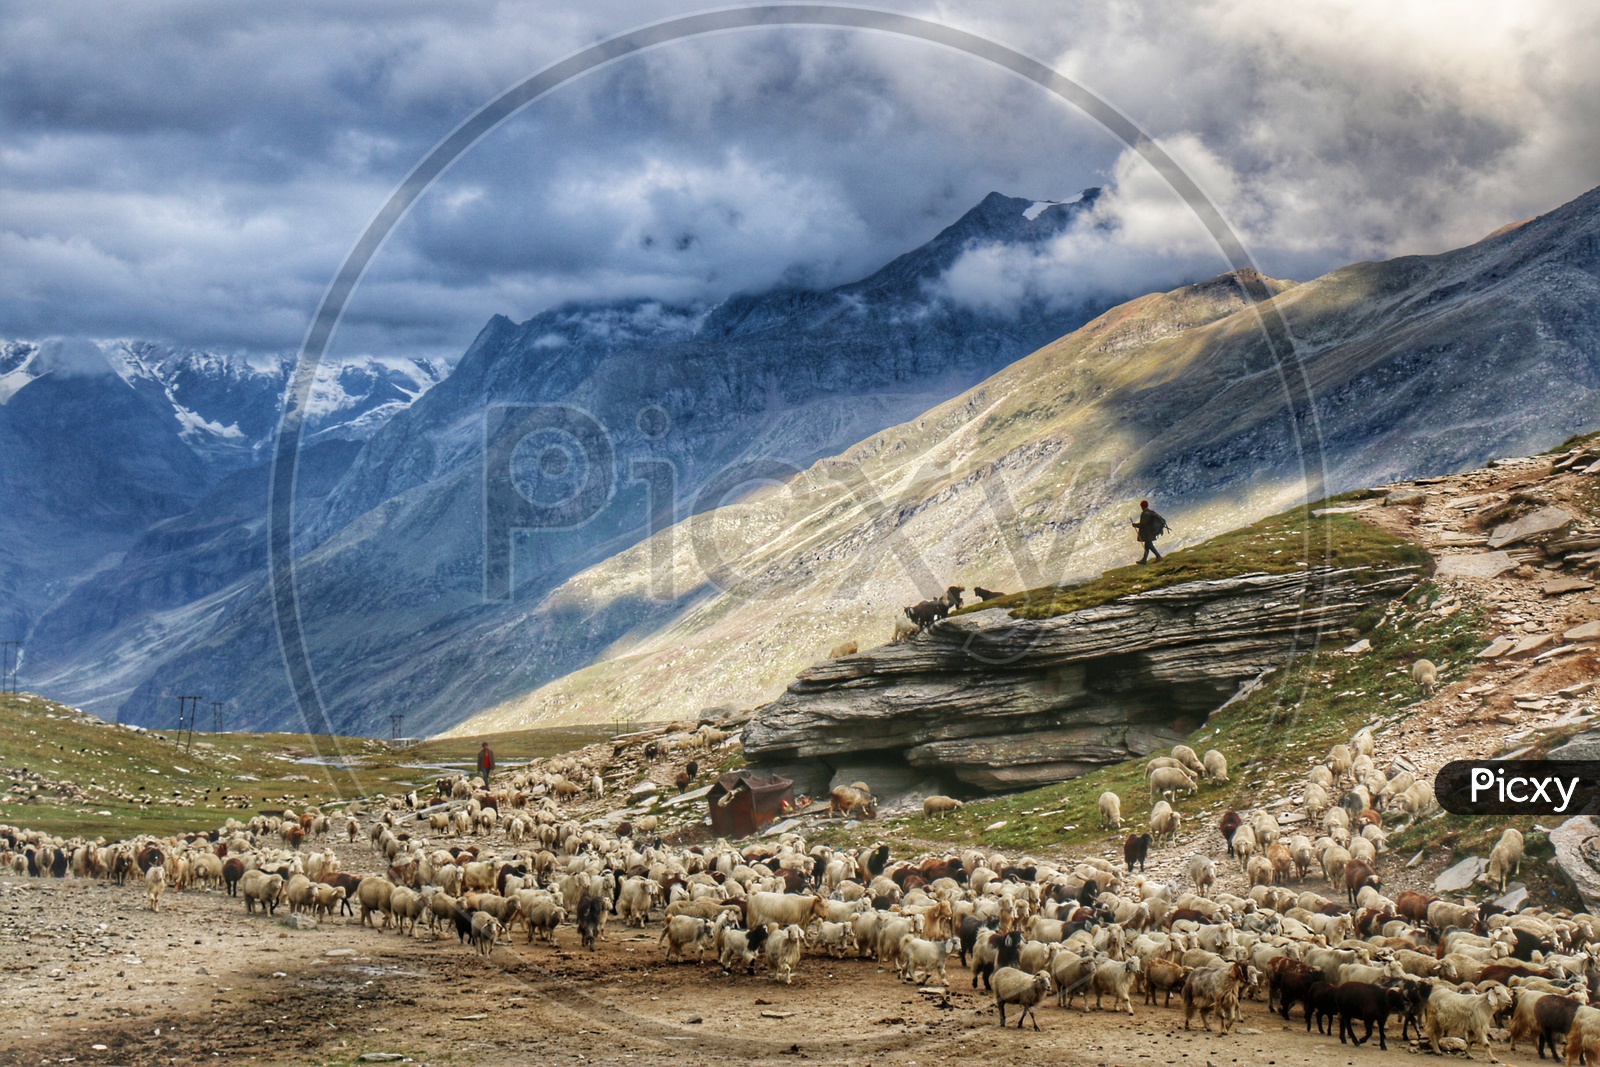 Flock Of Sheep Taking To Grazing On Terrains Of Leh